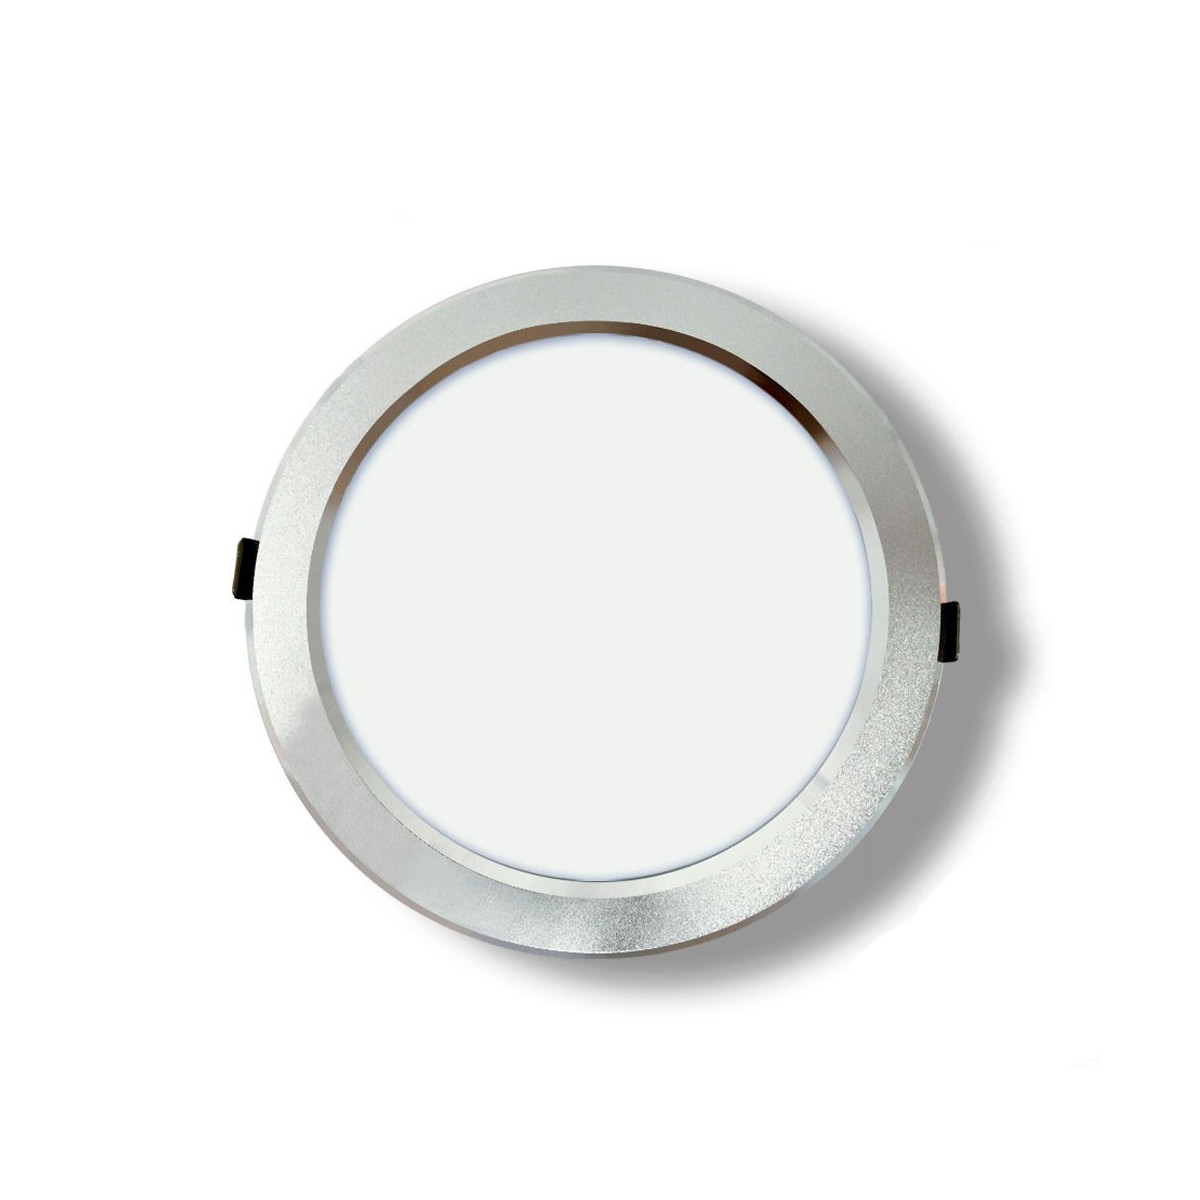 LED Downlight - silver Frame, Wide Beam, 12W